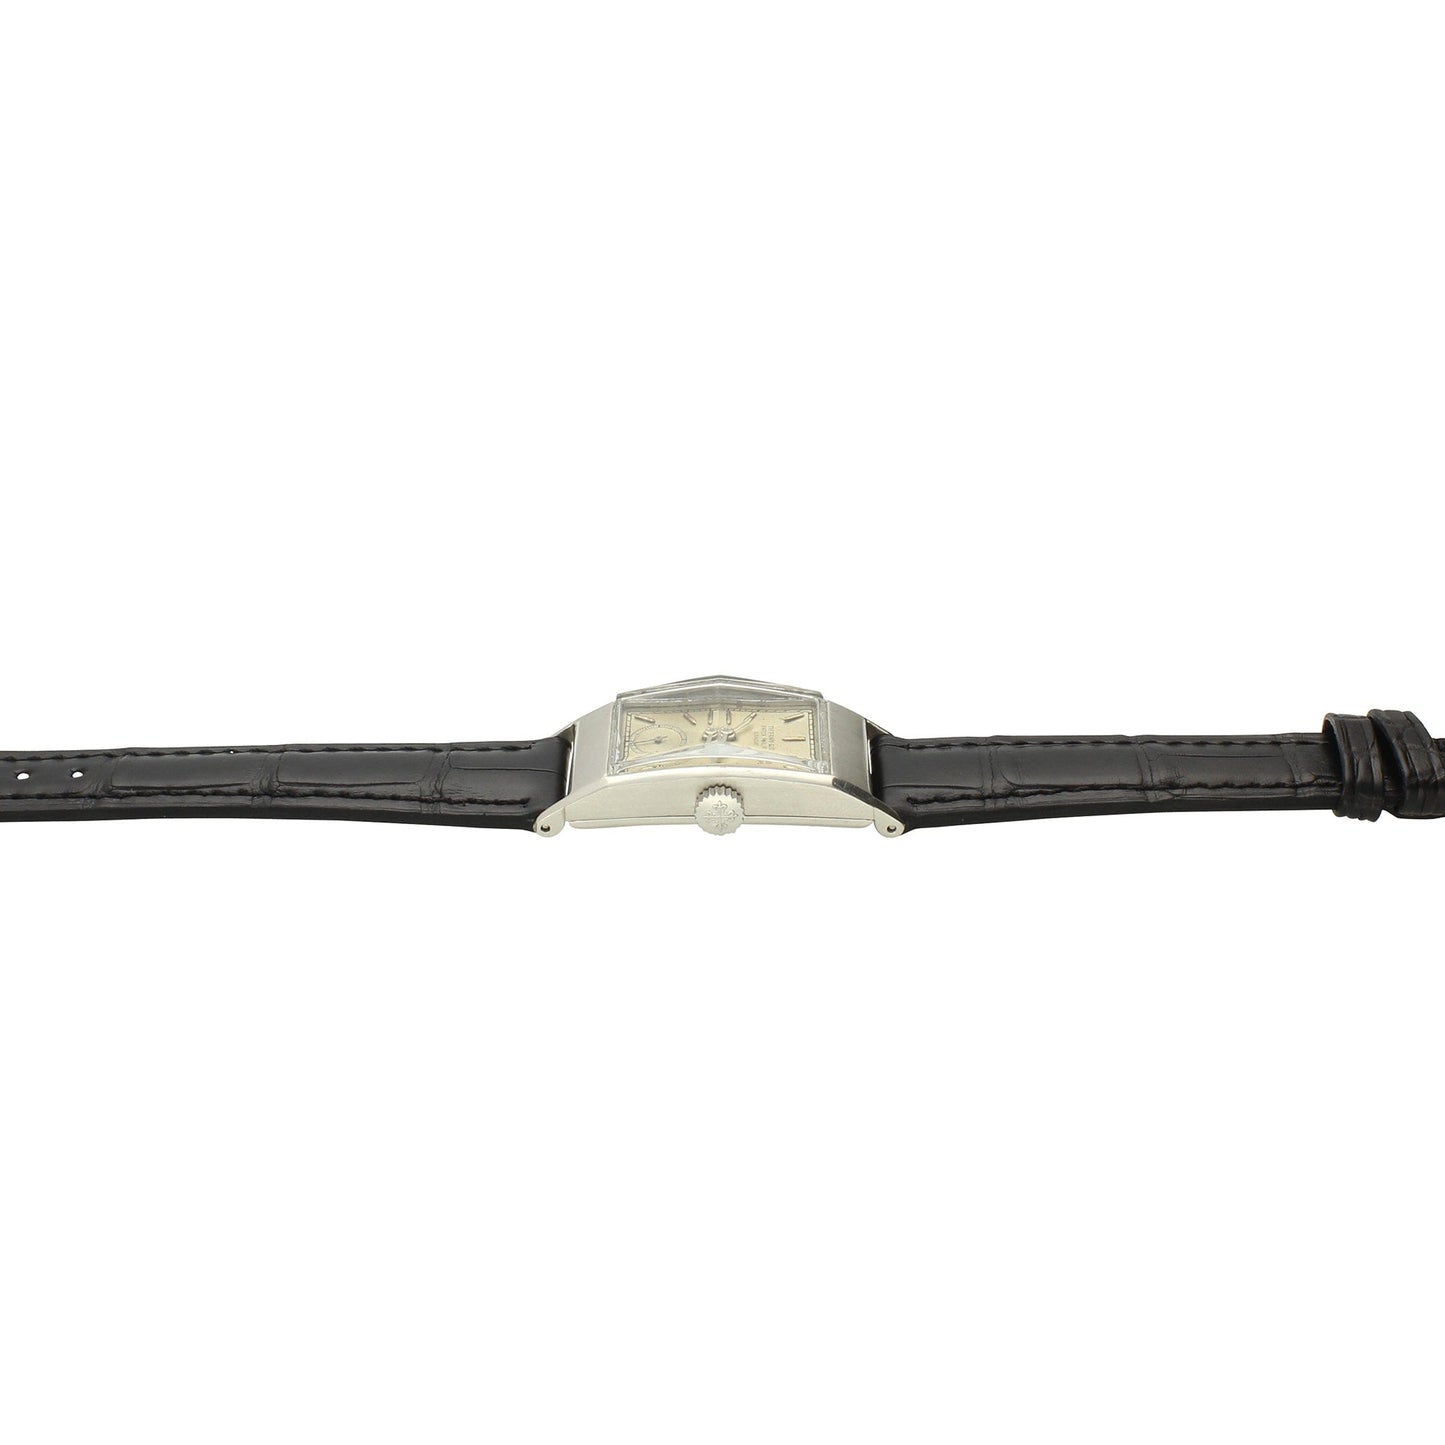 Platinum, reference 725 wristwatch, retailed by TIFFANY & CO. Made 1948